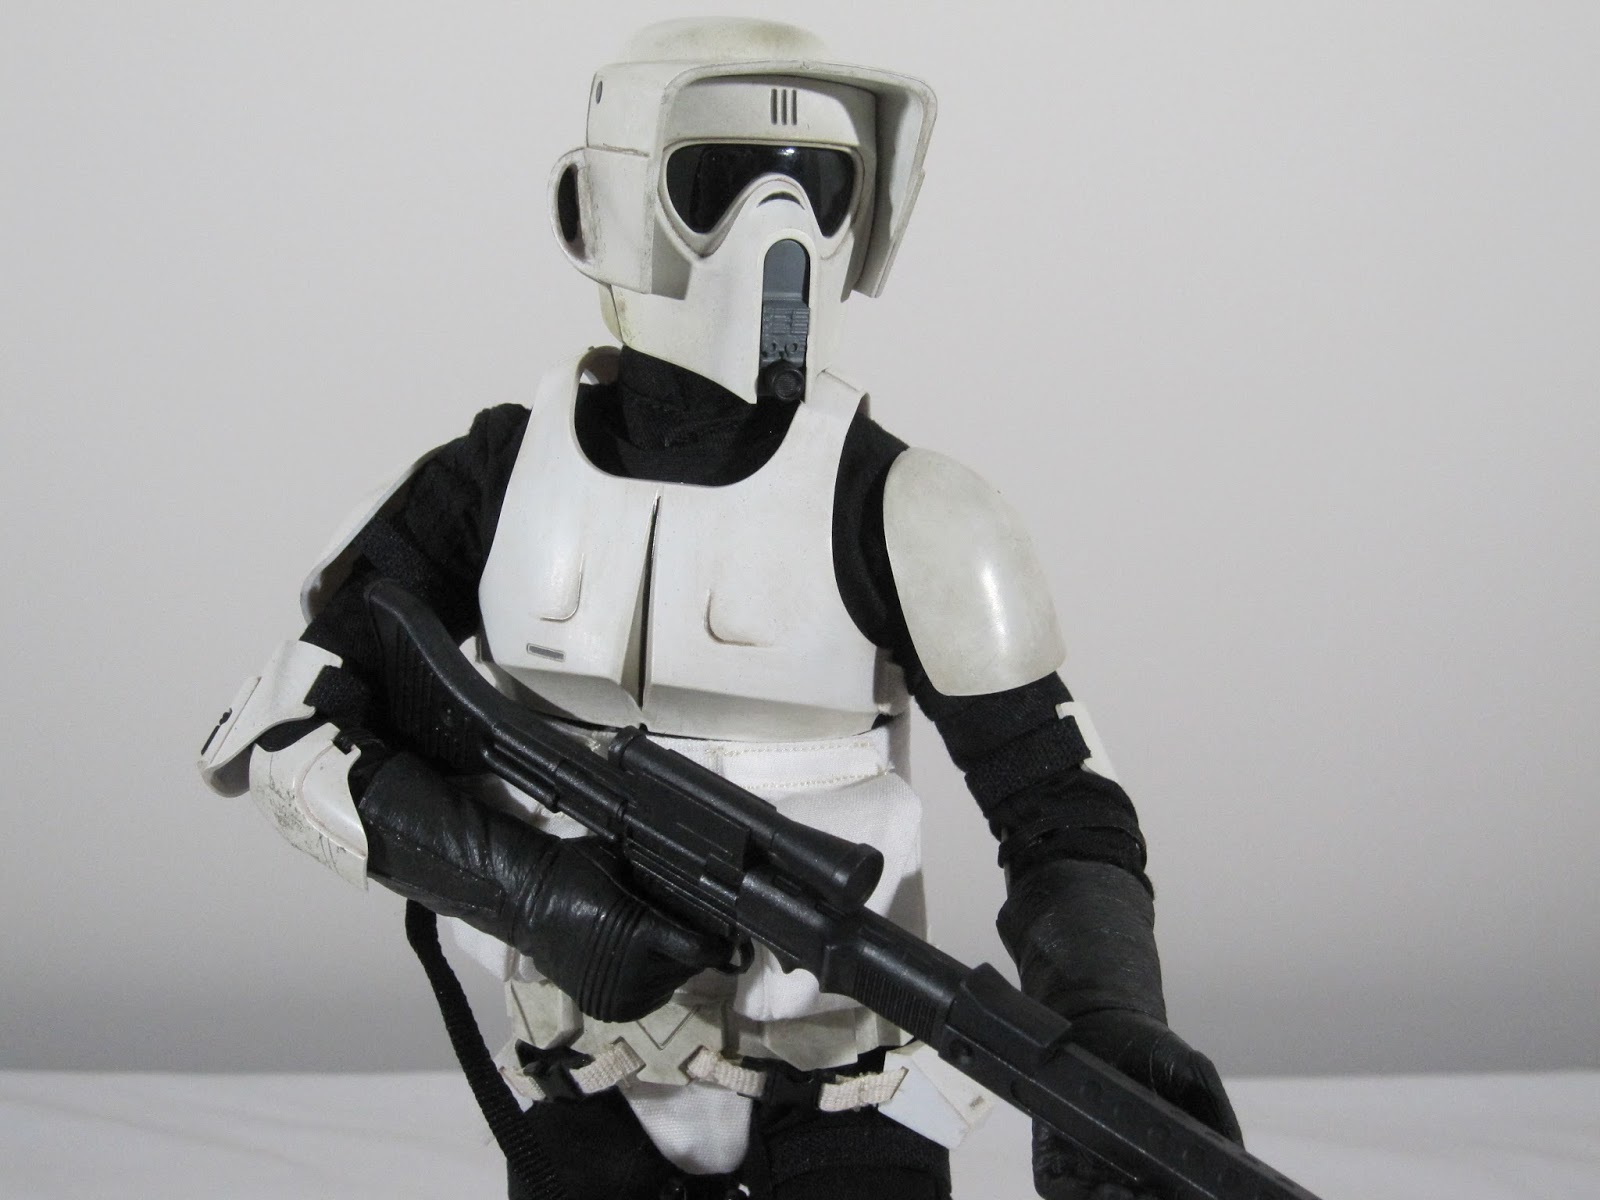 Sideshow Collectibles 1/6th scale Scout Trooper - Kool Kollectibles